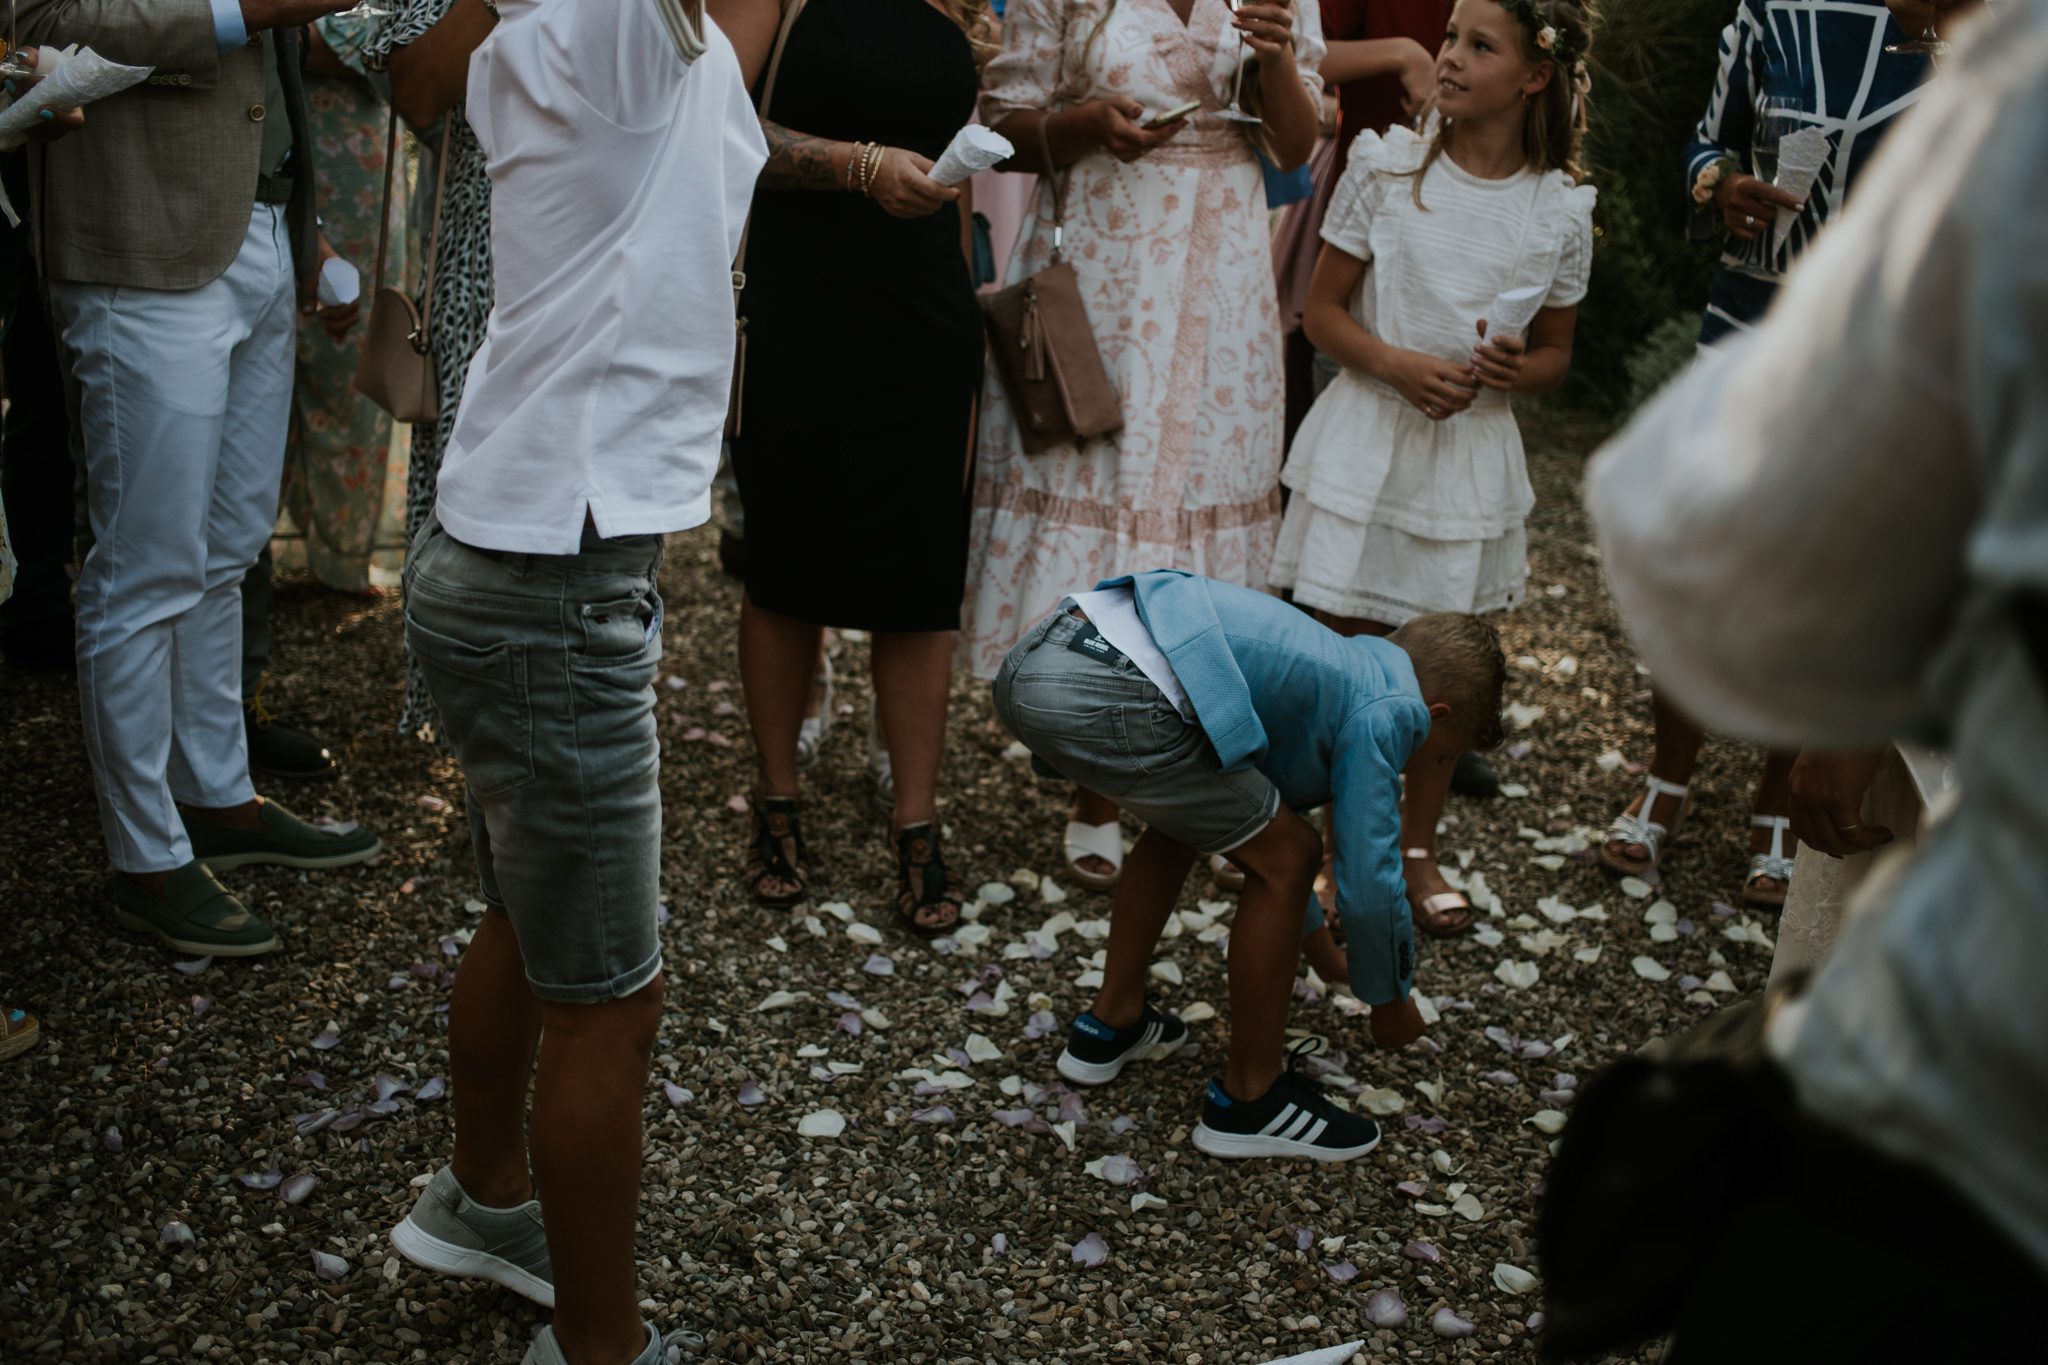 Children play with confetti after a wedding ceremony at Fattoria di Corsigano near Siena in Tuscany, Italy